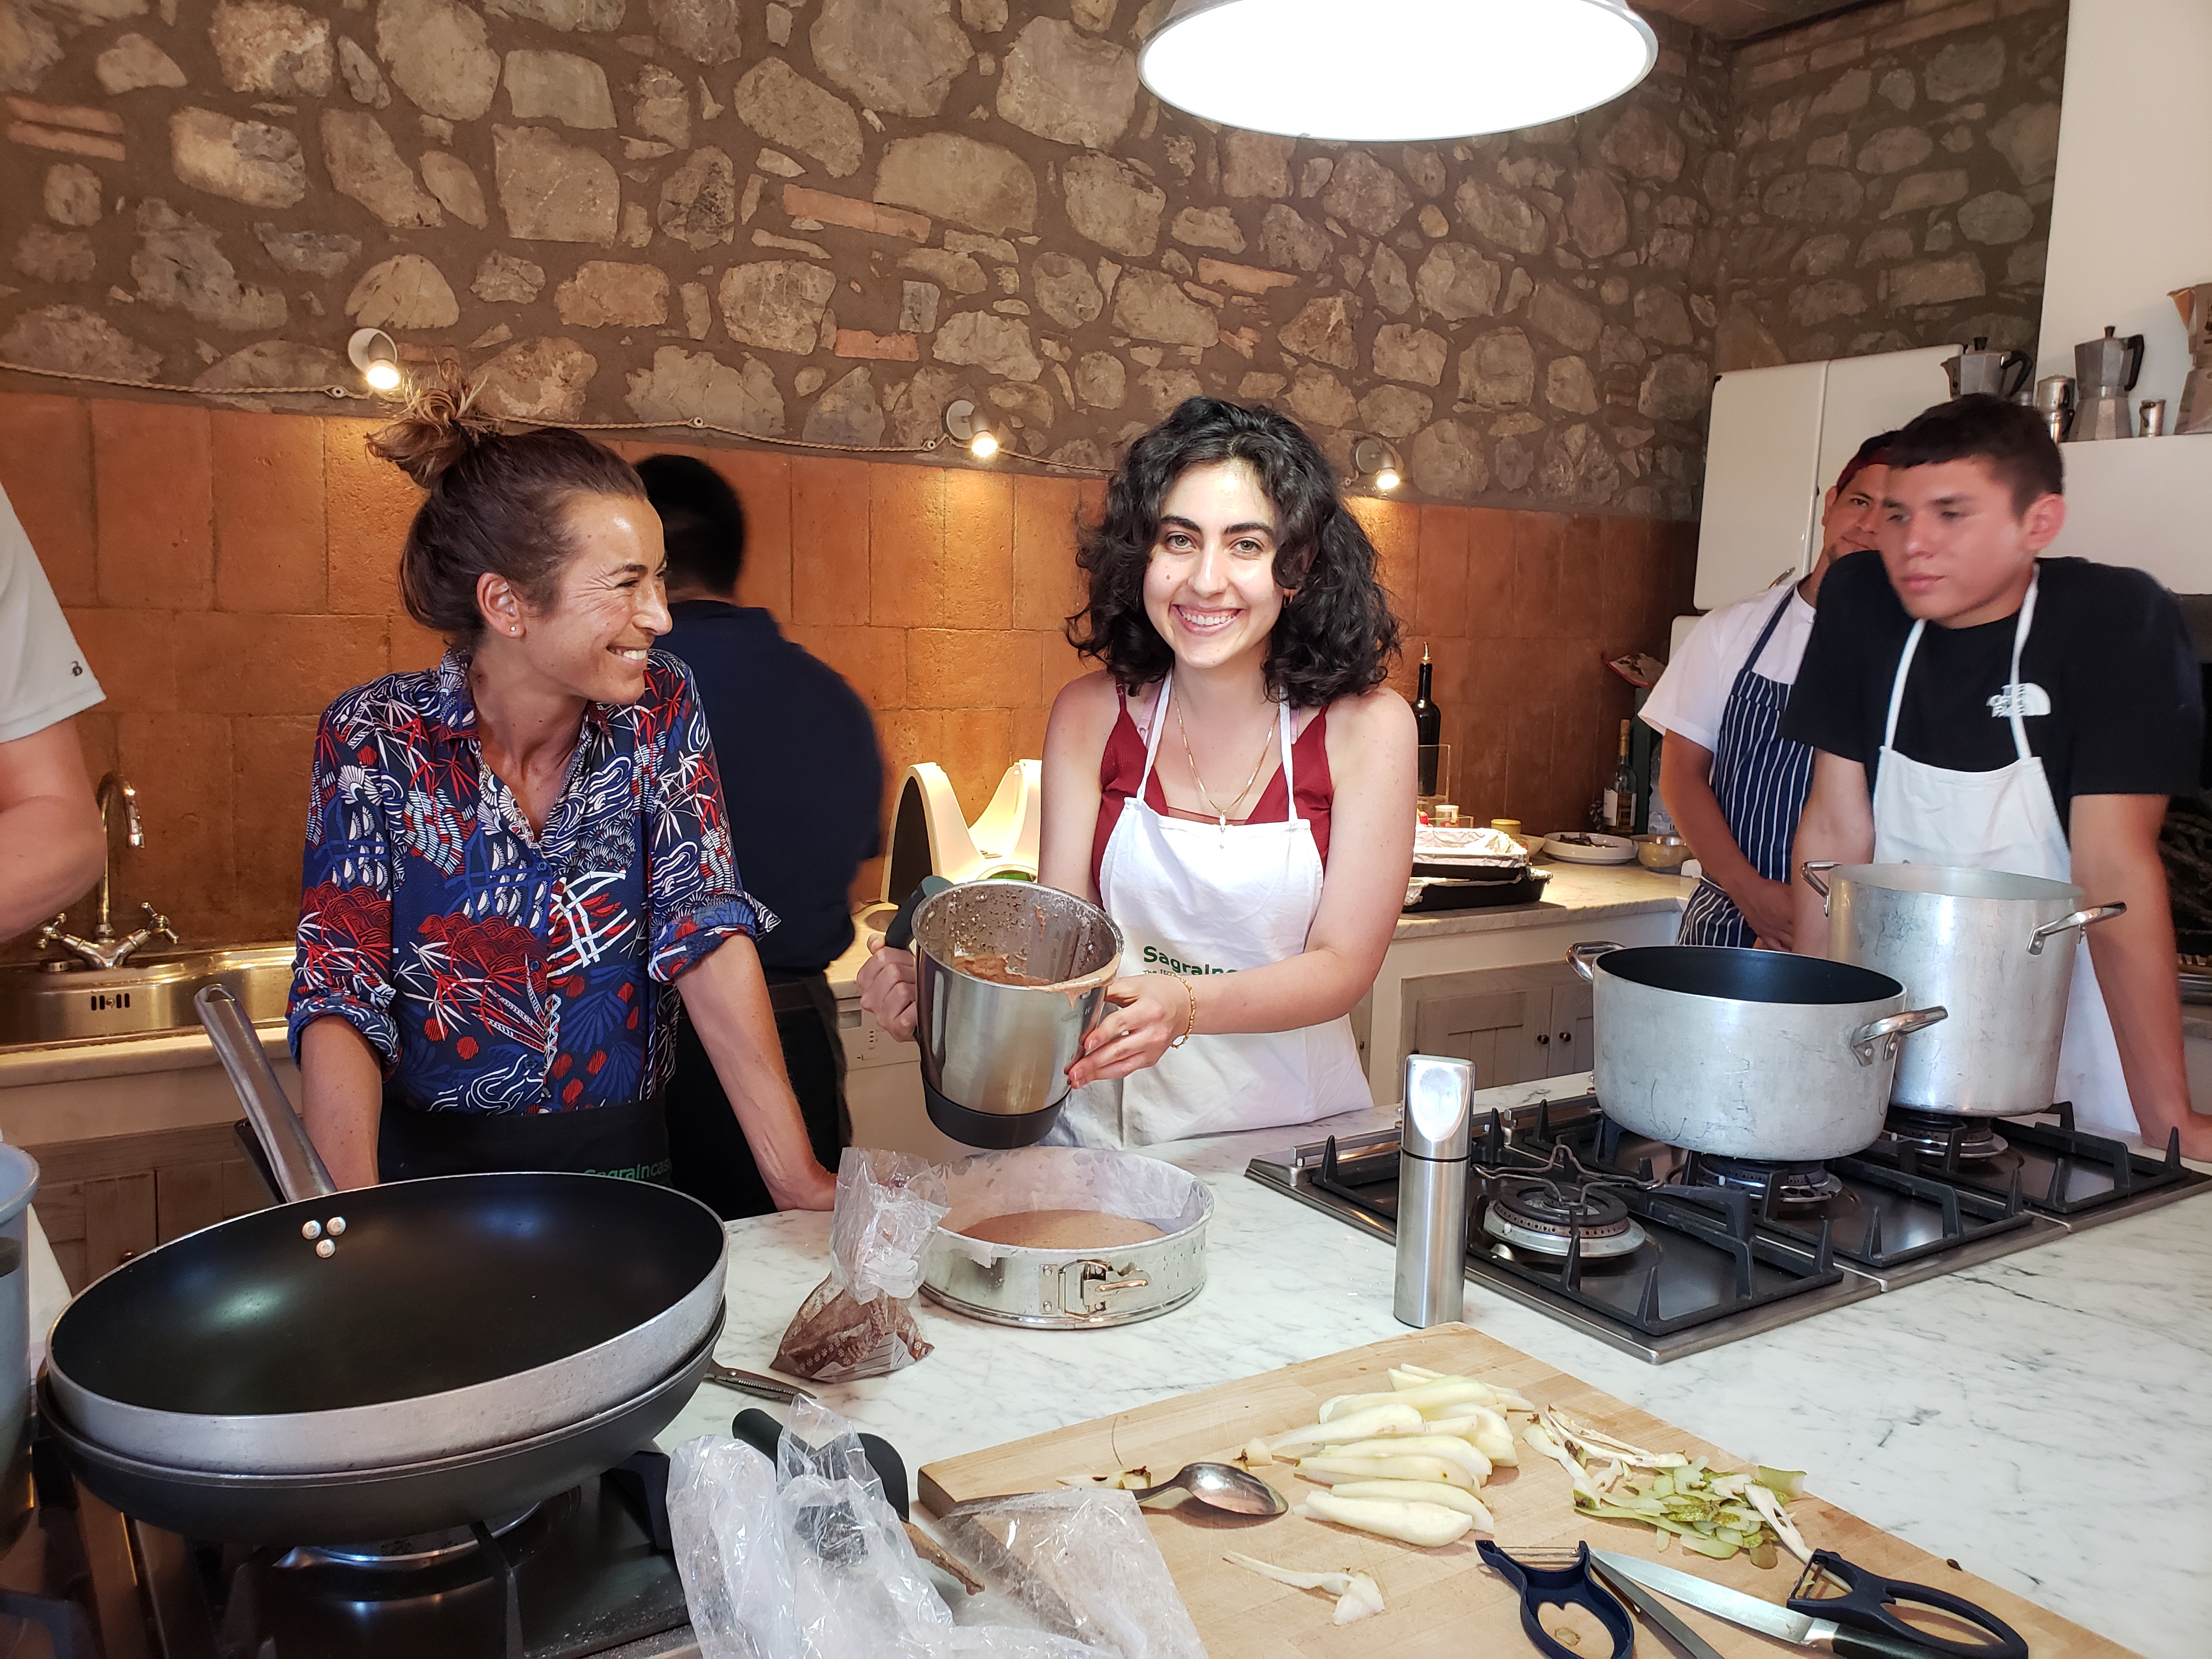 Students in a cooking class in Italy